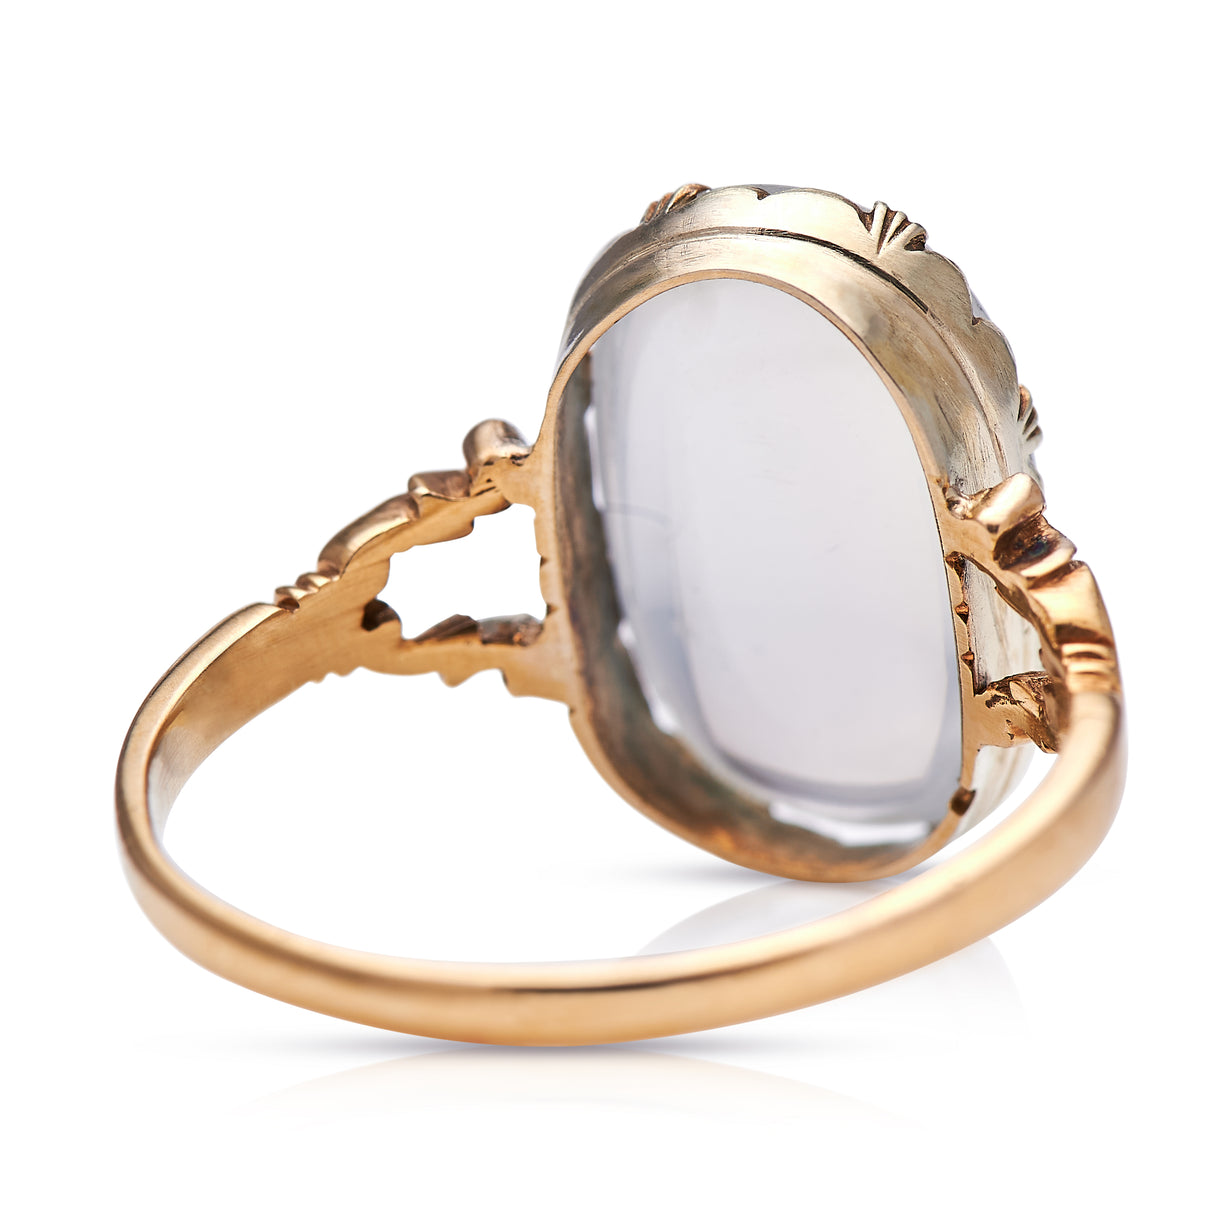 Antique Engagement Rings | Antique Ring Boutique | Vintage Engagement Rings | Antique Engagement Rings | Antique Jewellery company | Vintage Jewellery  19th Century, 15ct Gold, Moonstone Ring